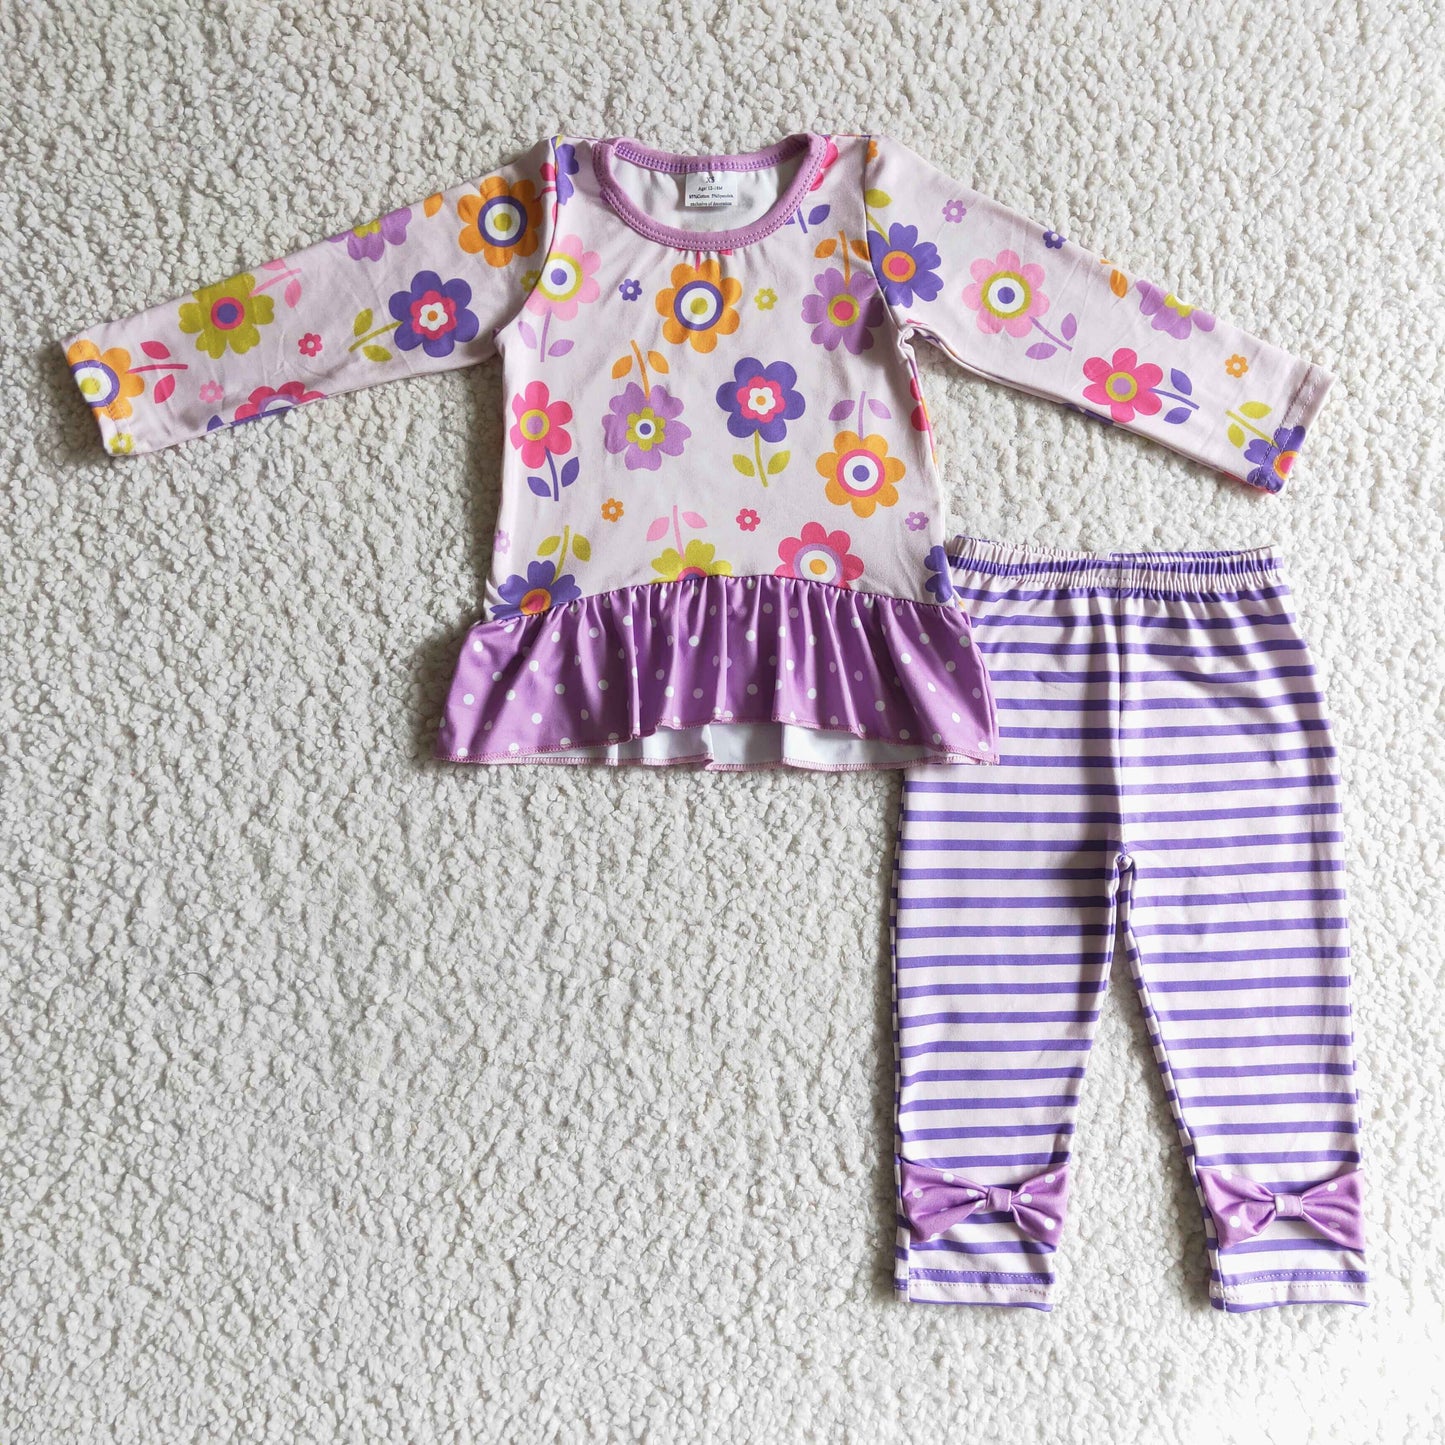 GLP0225 Girls purple floral stripe pants outfits